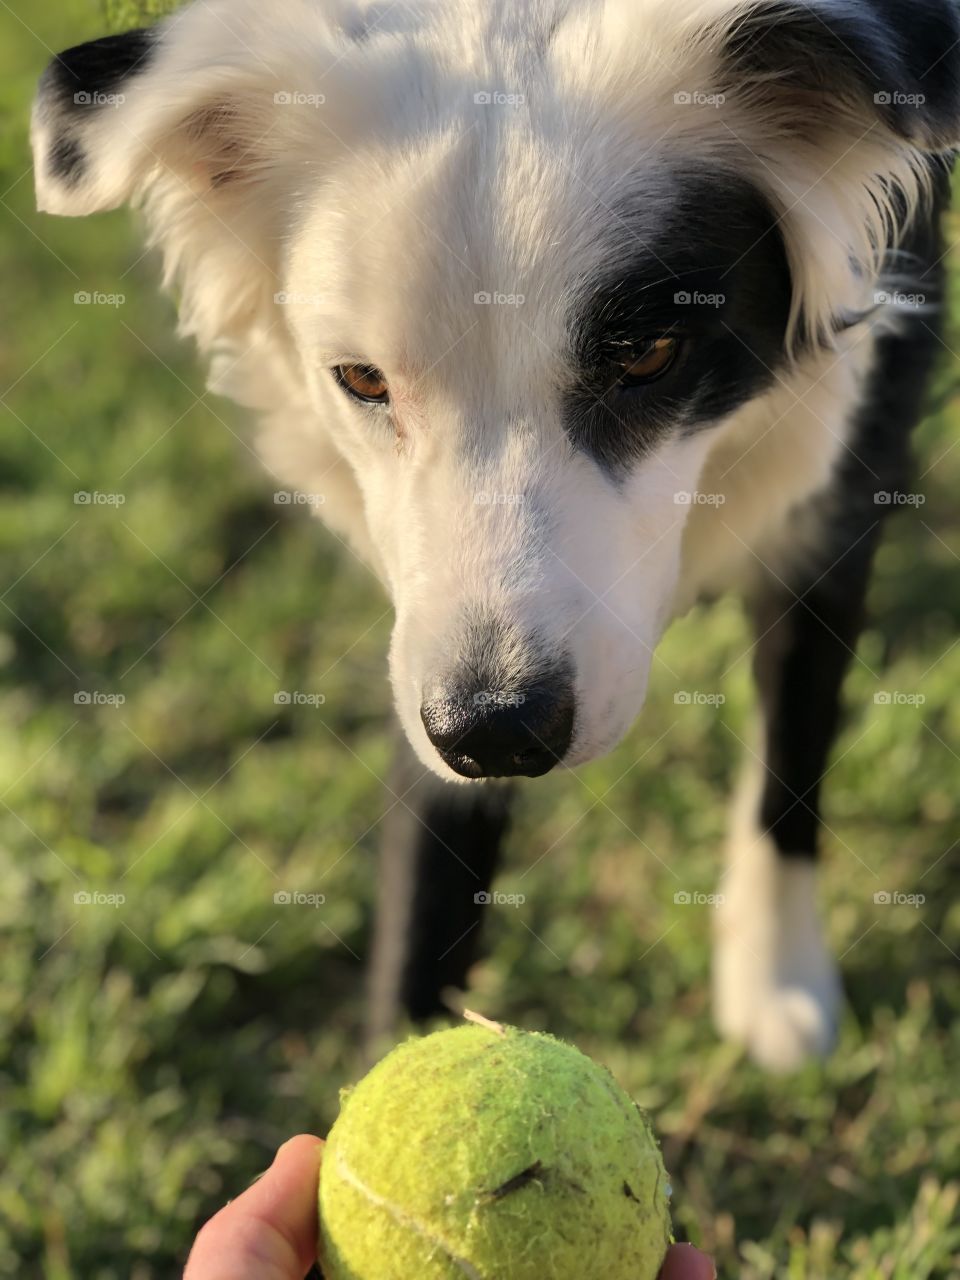 Meet Apache! He is a Border Aussie & service dog to retired Navy Veteran. The intensity of his stare says it all about his love of fetch & tennis balls. 